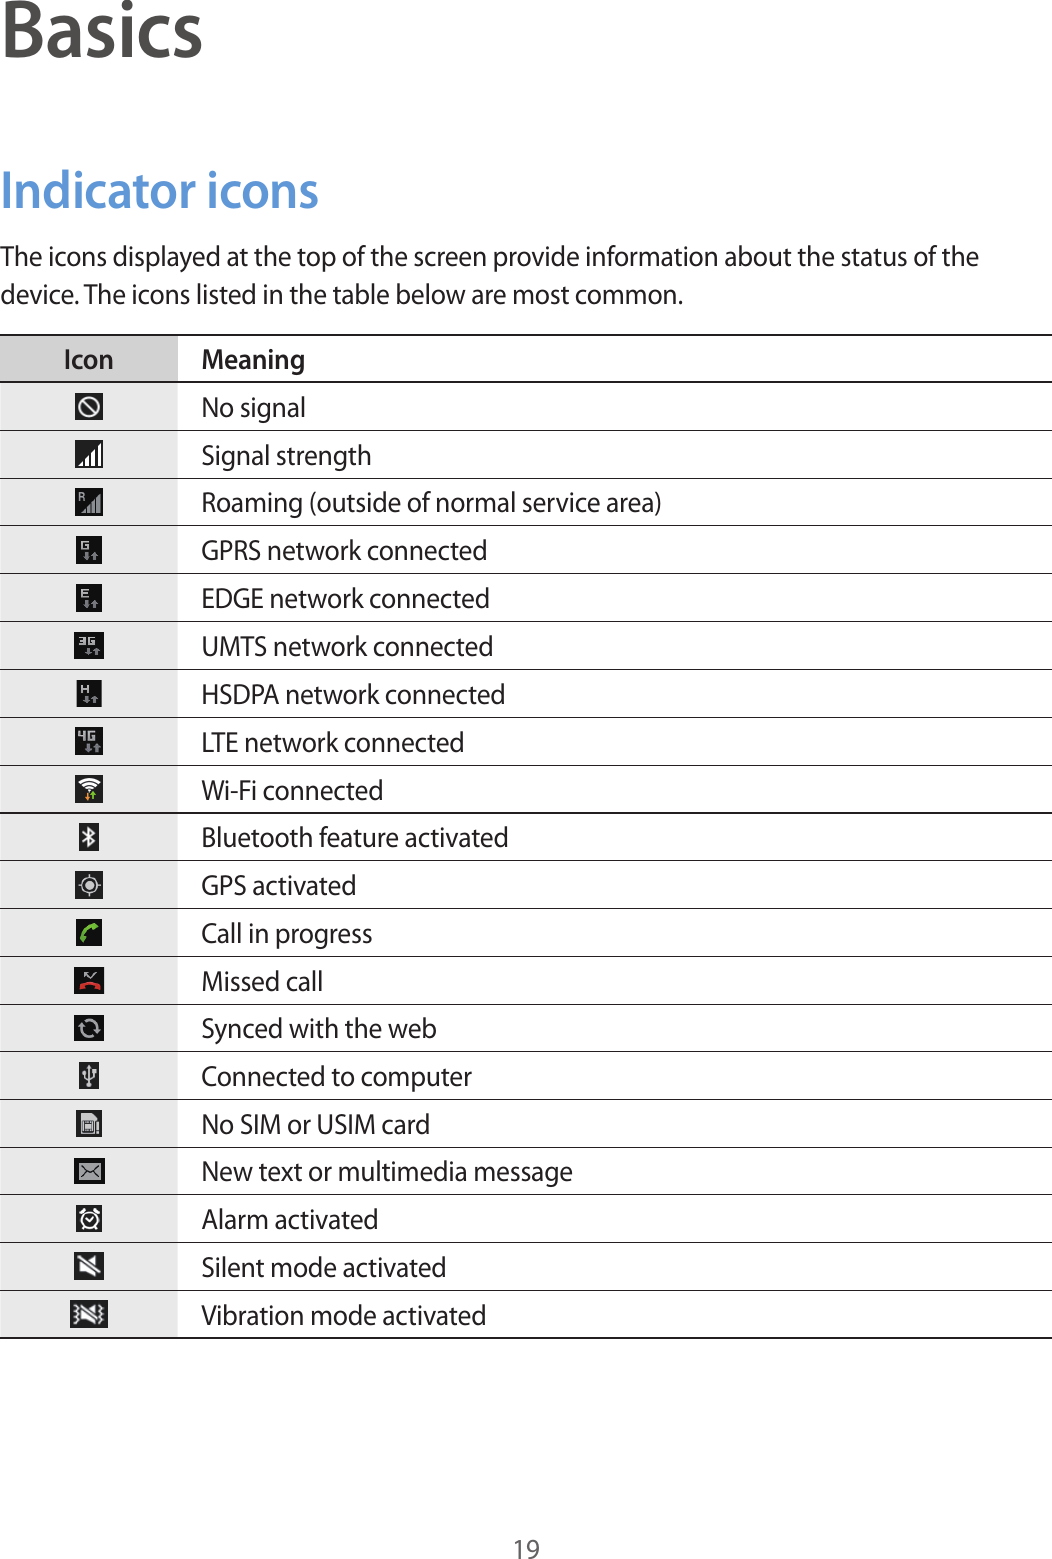 19BasicsIndicator iconsThe icons displayed at the top of the screen provide information about the status of the device. The icons listed in the table below are most common.Icon MeaningNo signalSignal strengthRoaming (outside of normal service area)GPRS network connectedEDGE network connectedUMTS network connectedHSDPA network connectedLTE network connectedWi-Fi connectedBluetooth feature activatedGPS activatedCall in progressMissed callSynced with the webConnected to computerNo SIM or USIM cardNew text or multimedia messageAlarm activatedSilent mode activatedVibration mode activated